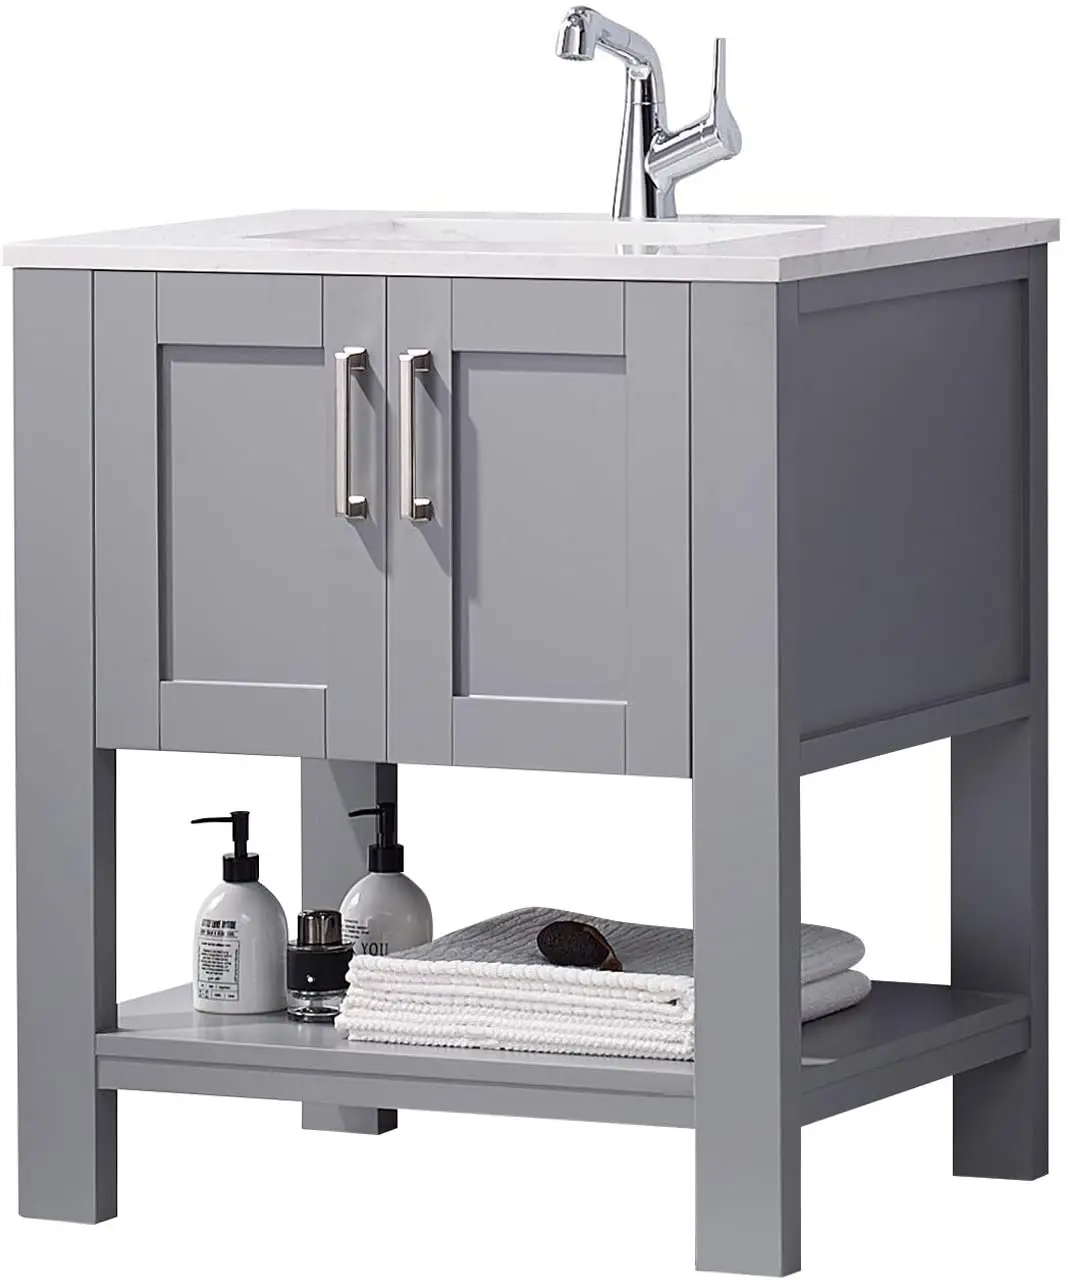 

Gray Bathroom Vanity with Sink 30 Inch Bathroom Vanity Cabinet Modern Bathroom Sink Vanity with Marble Countertop and White